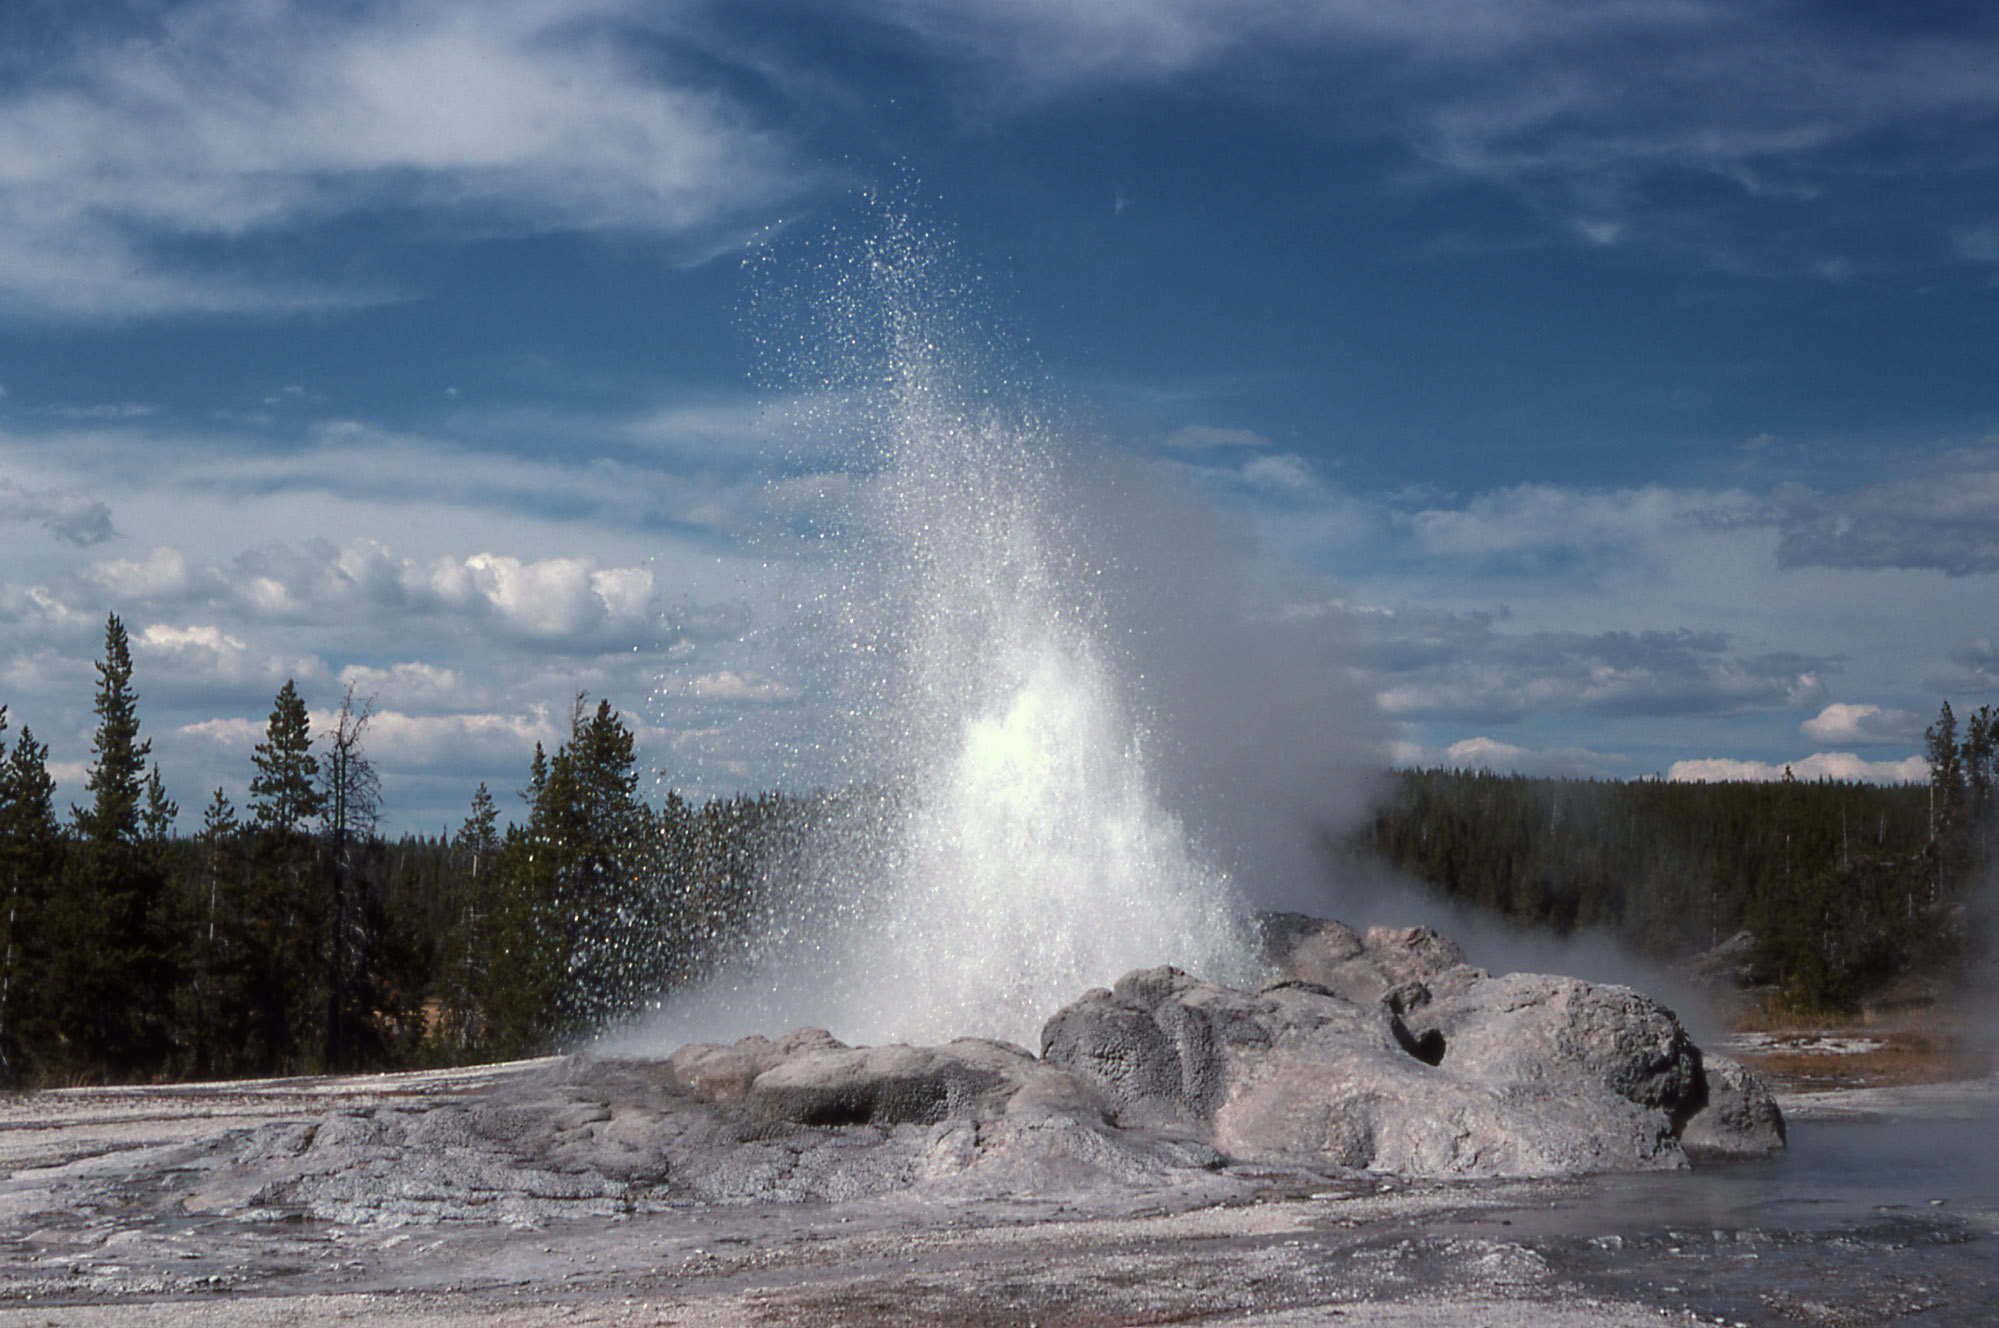 Water erupts out of a geyser cone with blue sky in the background.